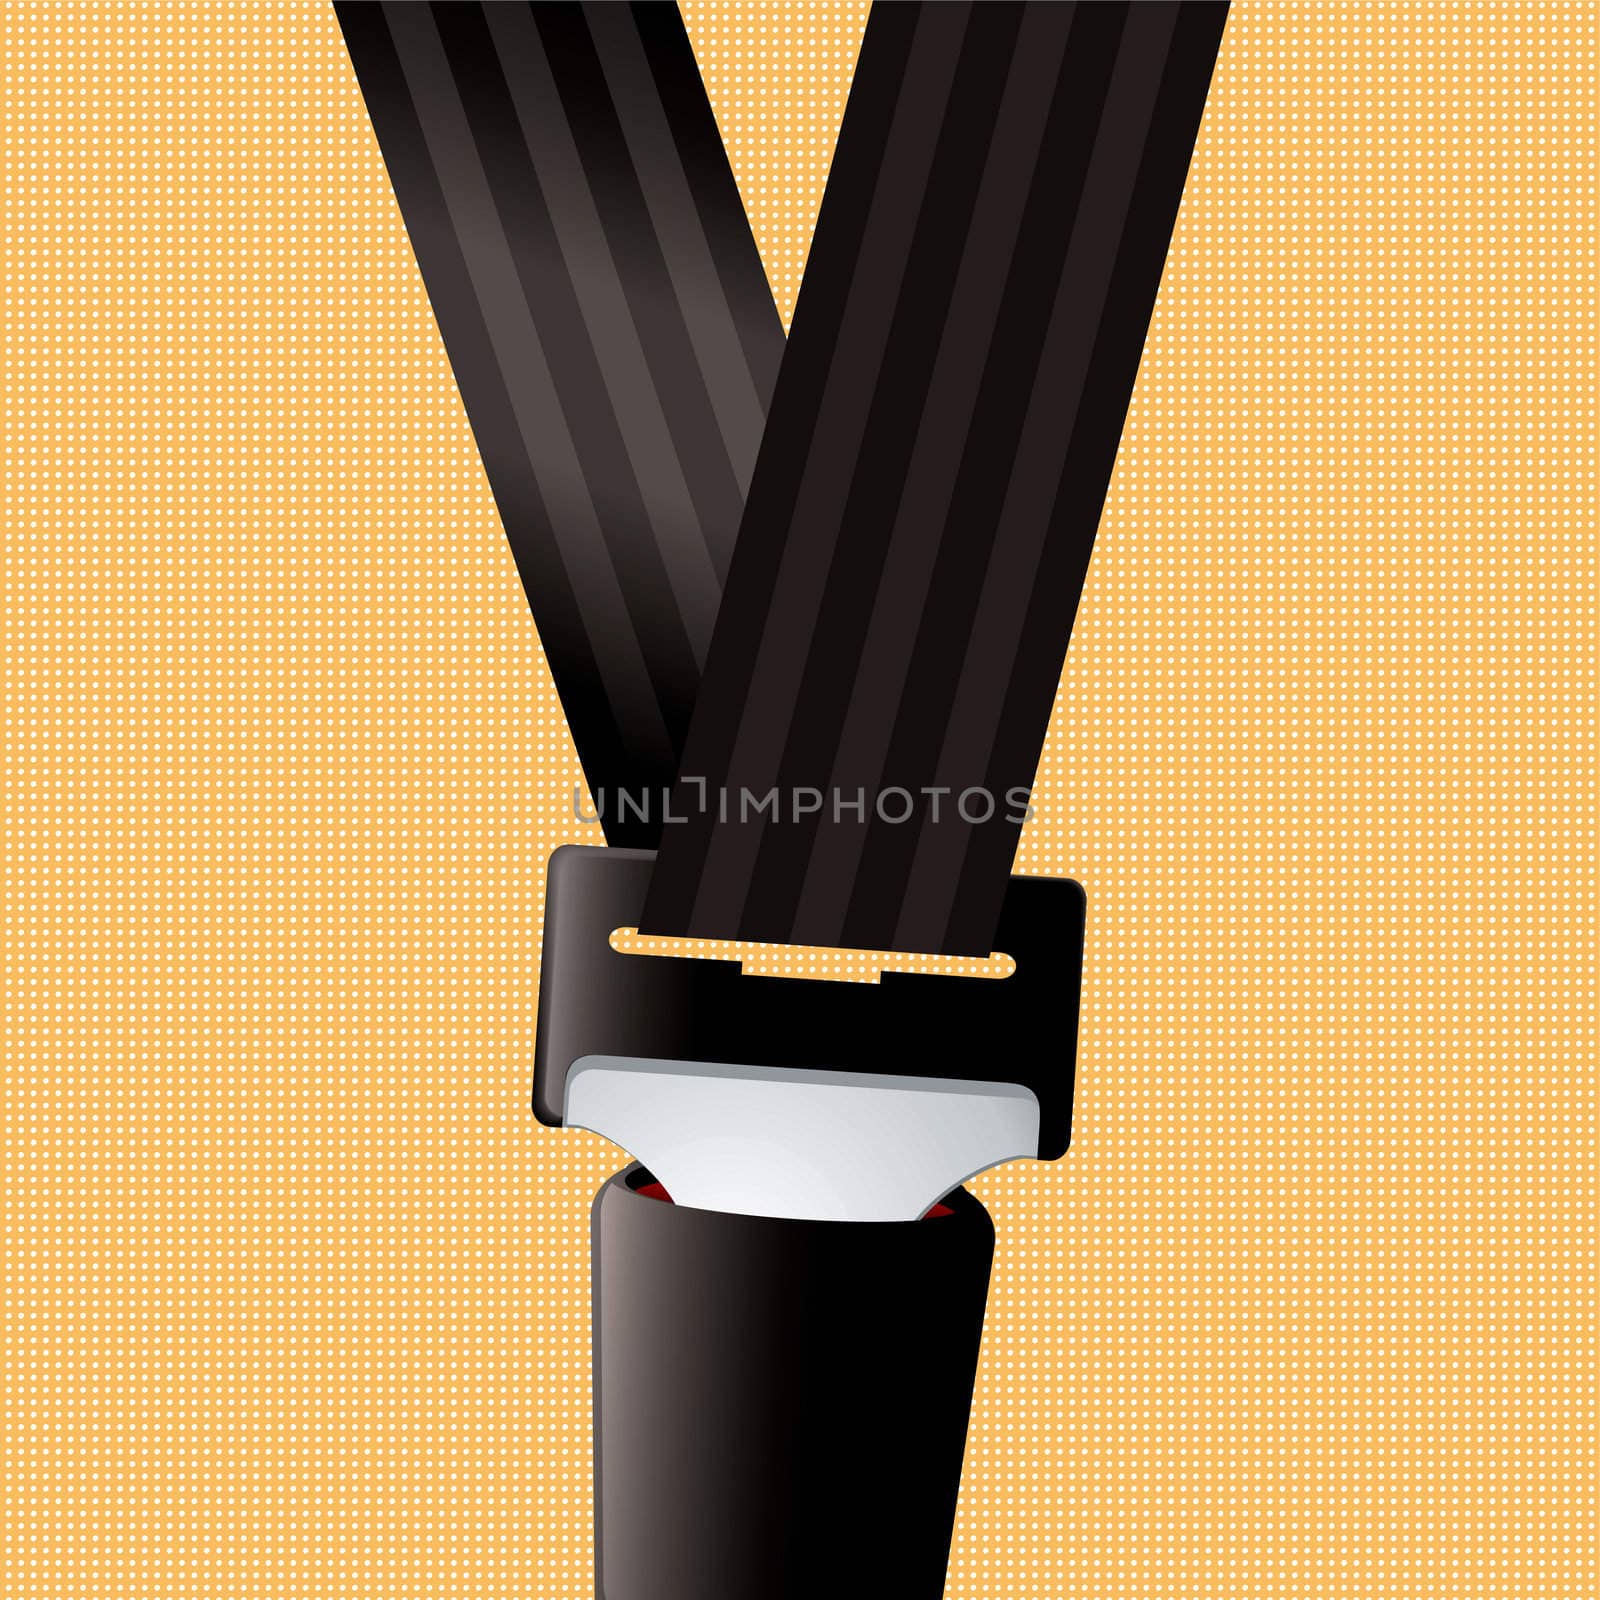 Saftey seat belt clipped in with orange background